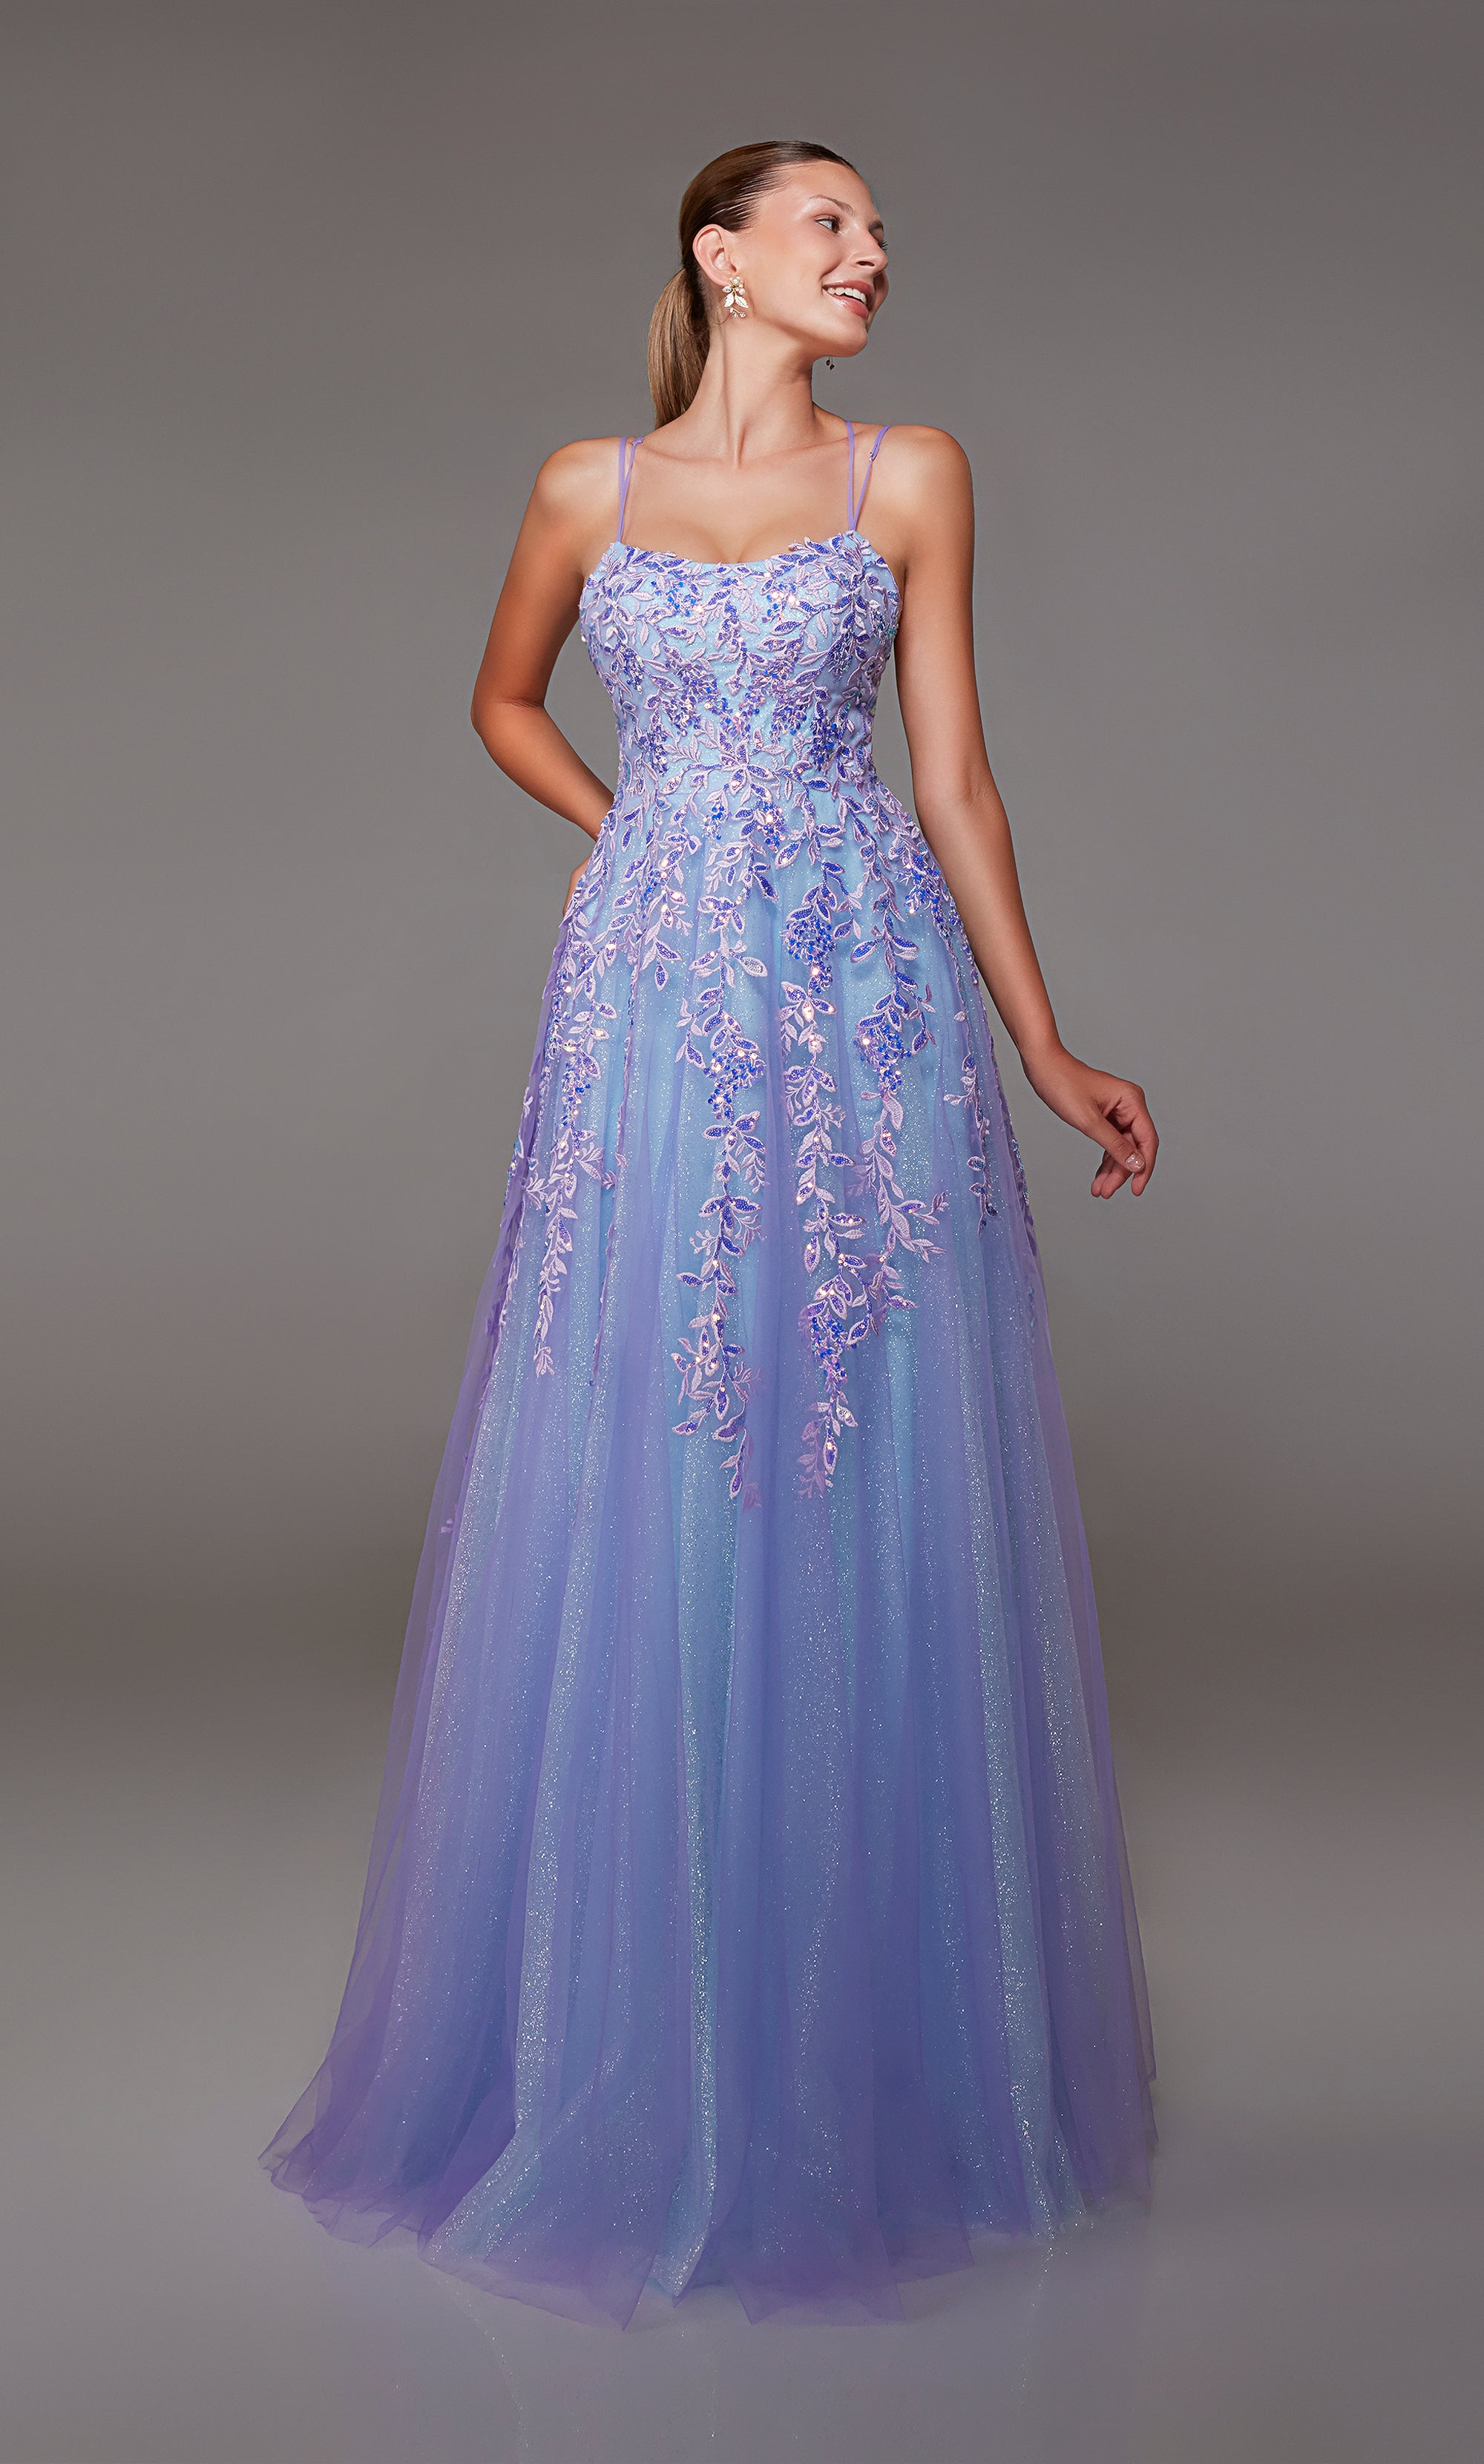 Purple-light blue glitter tulle A-line prom dress featuring an slightly scooped neckline, beaded floral lace appliques, and an lace up back closure for the perfect fit!